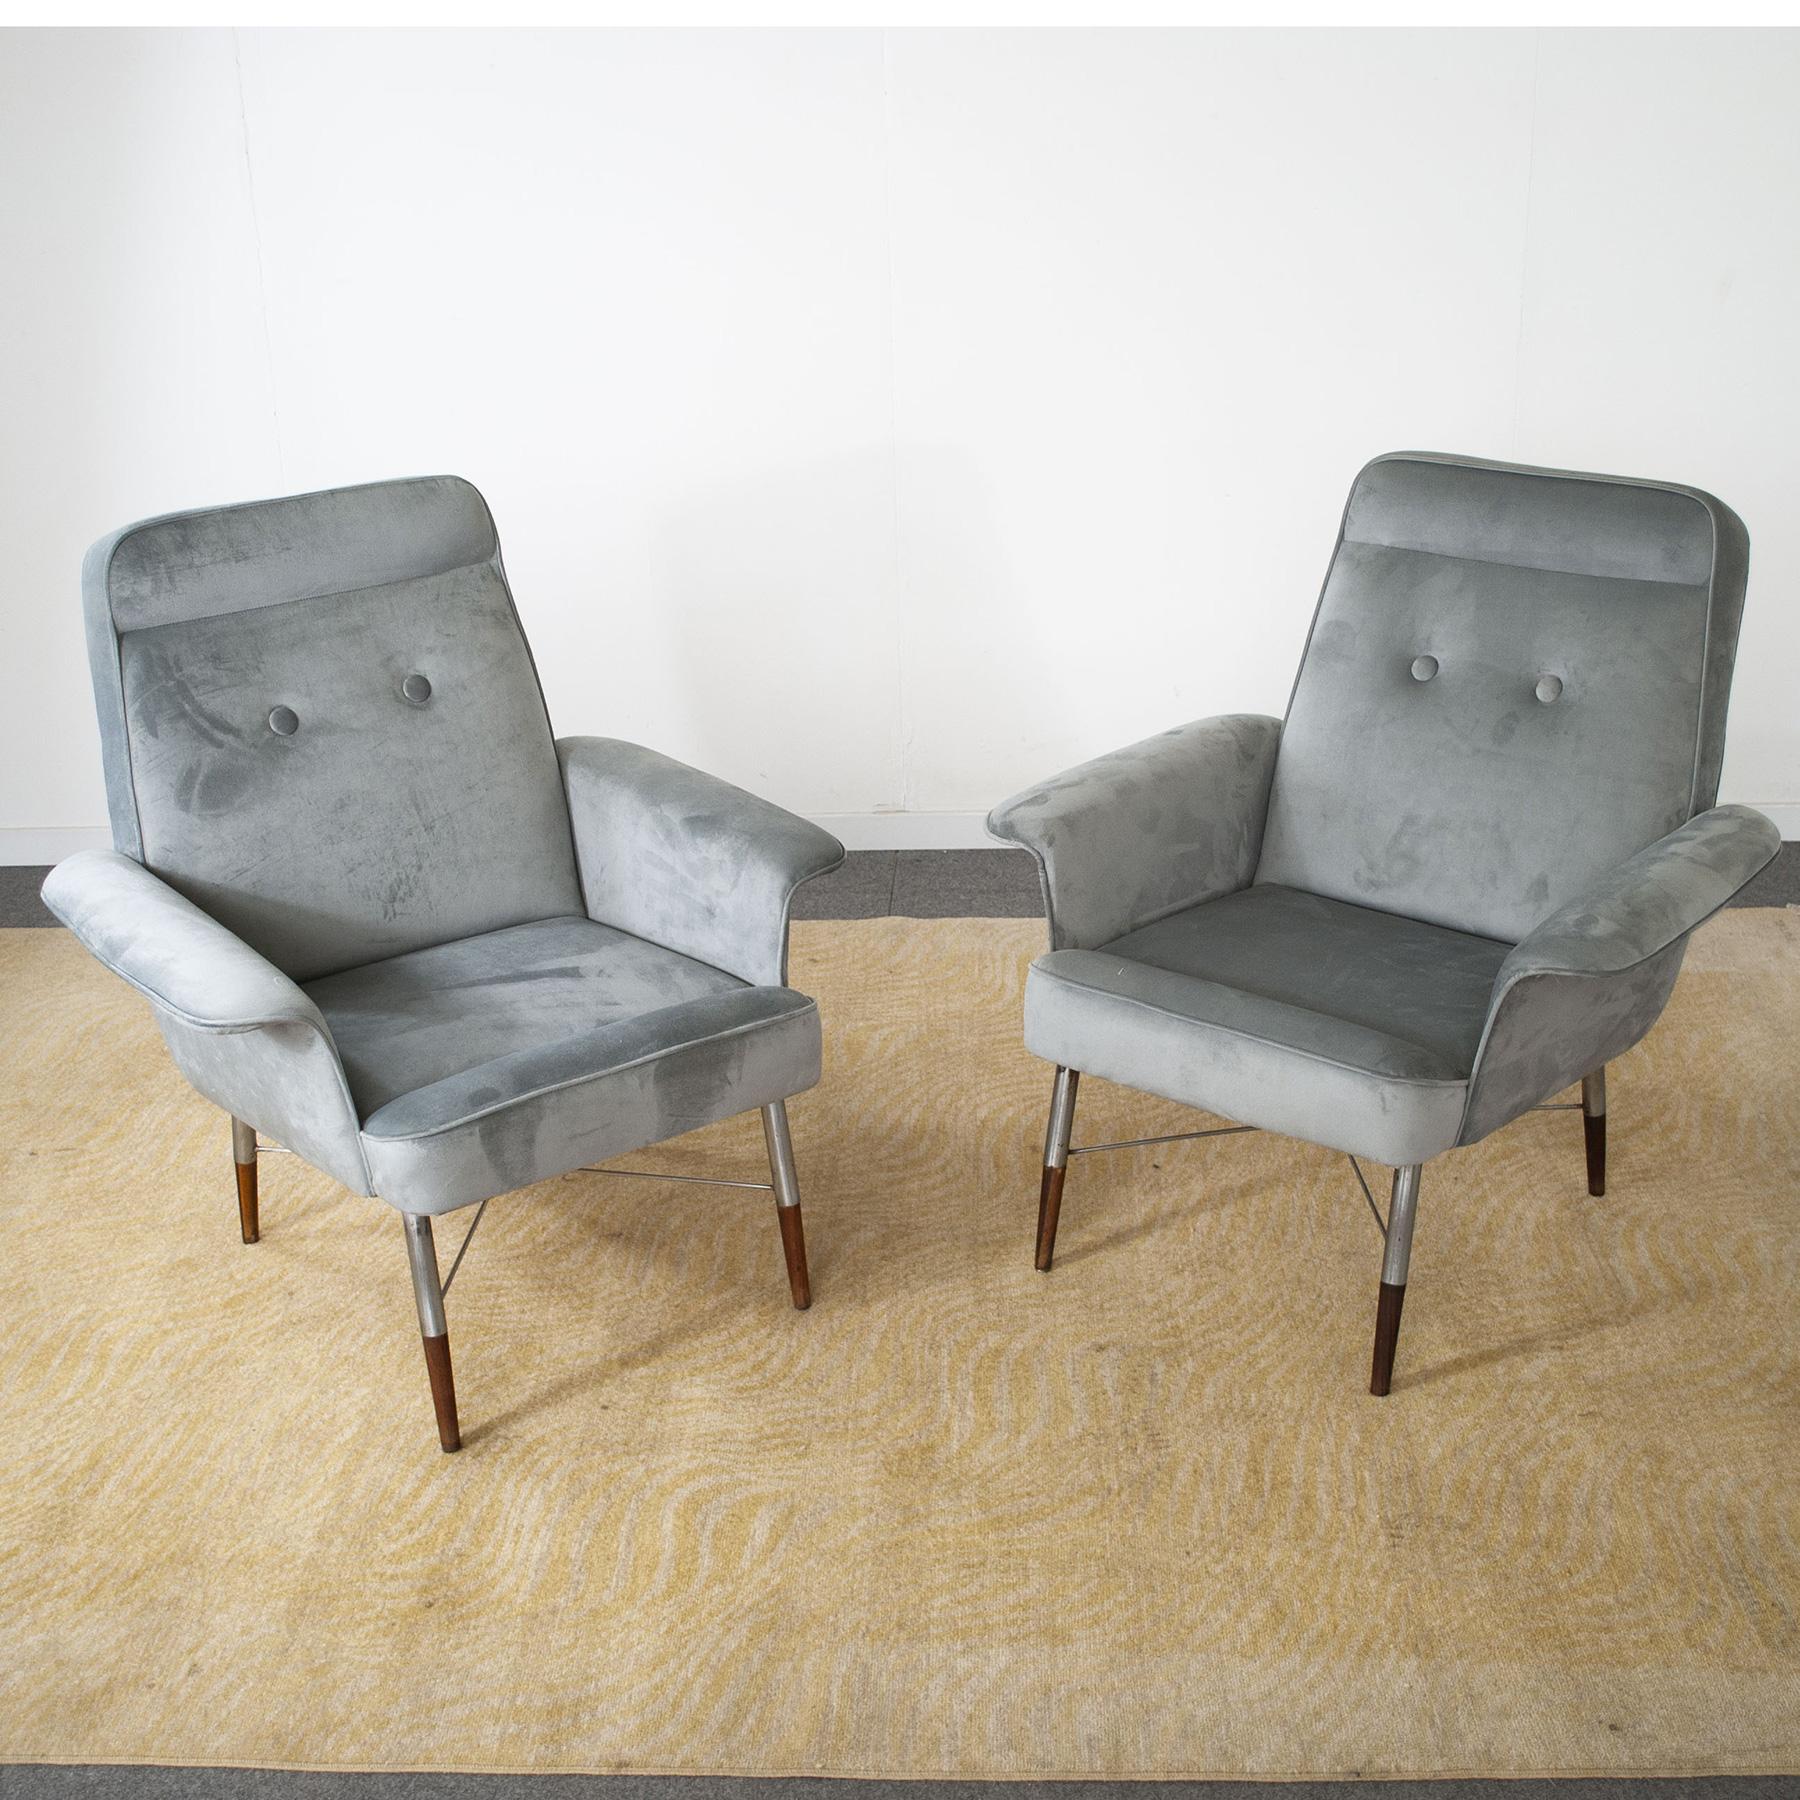 Set of two elegant Italian armchairs from the 60s, metal and wood structure completely restored and upholstered in grey velvet.